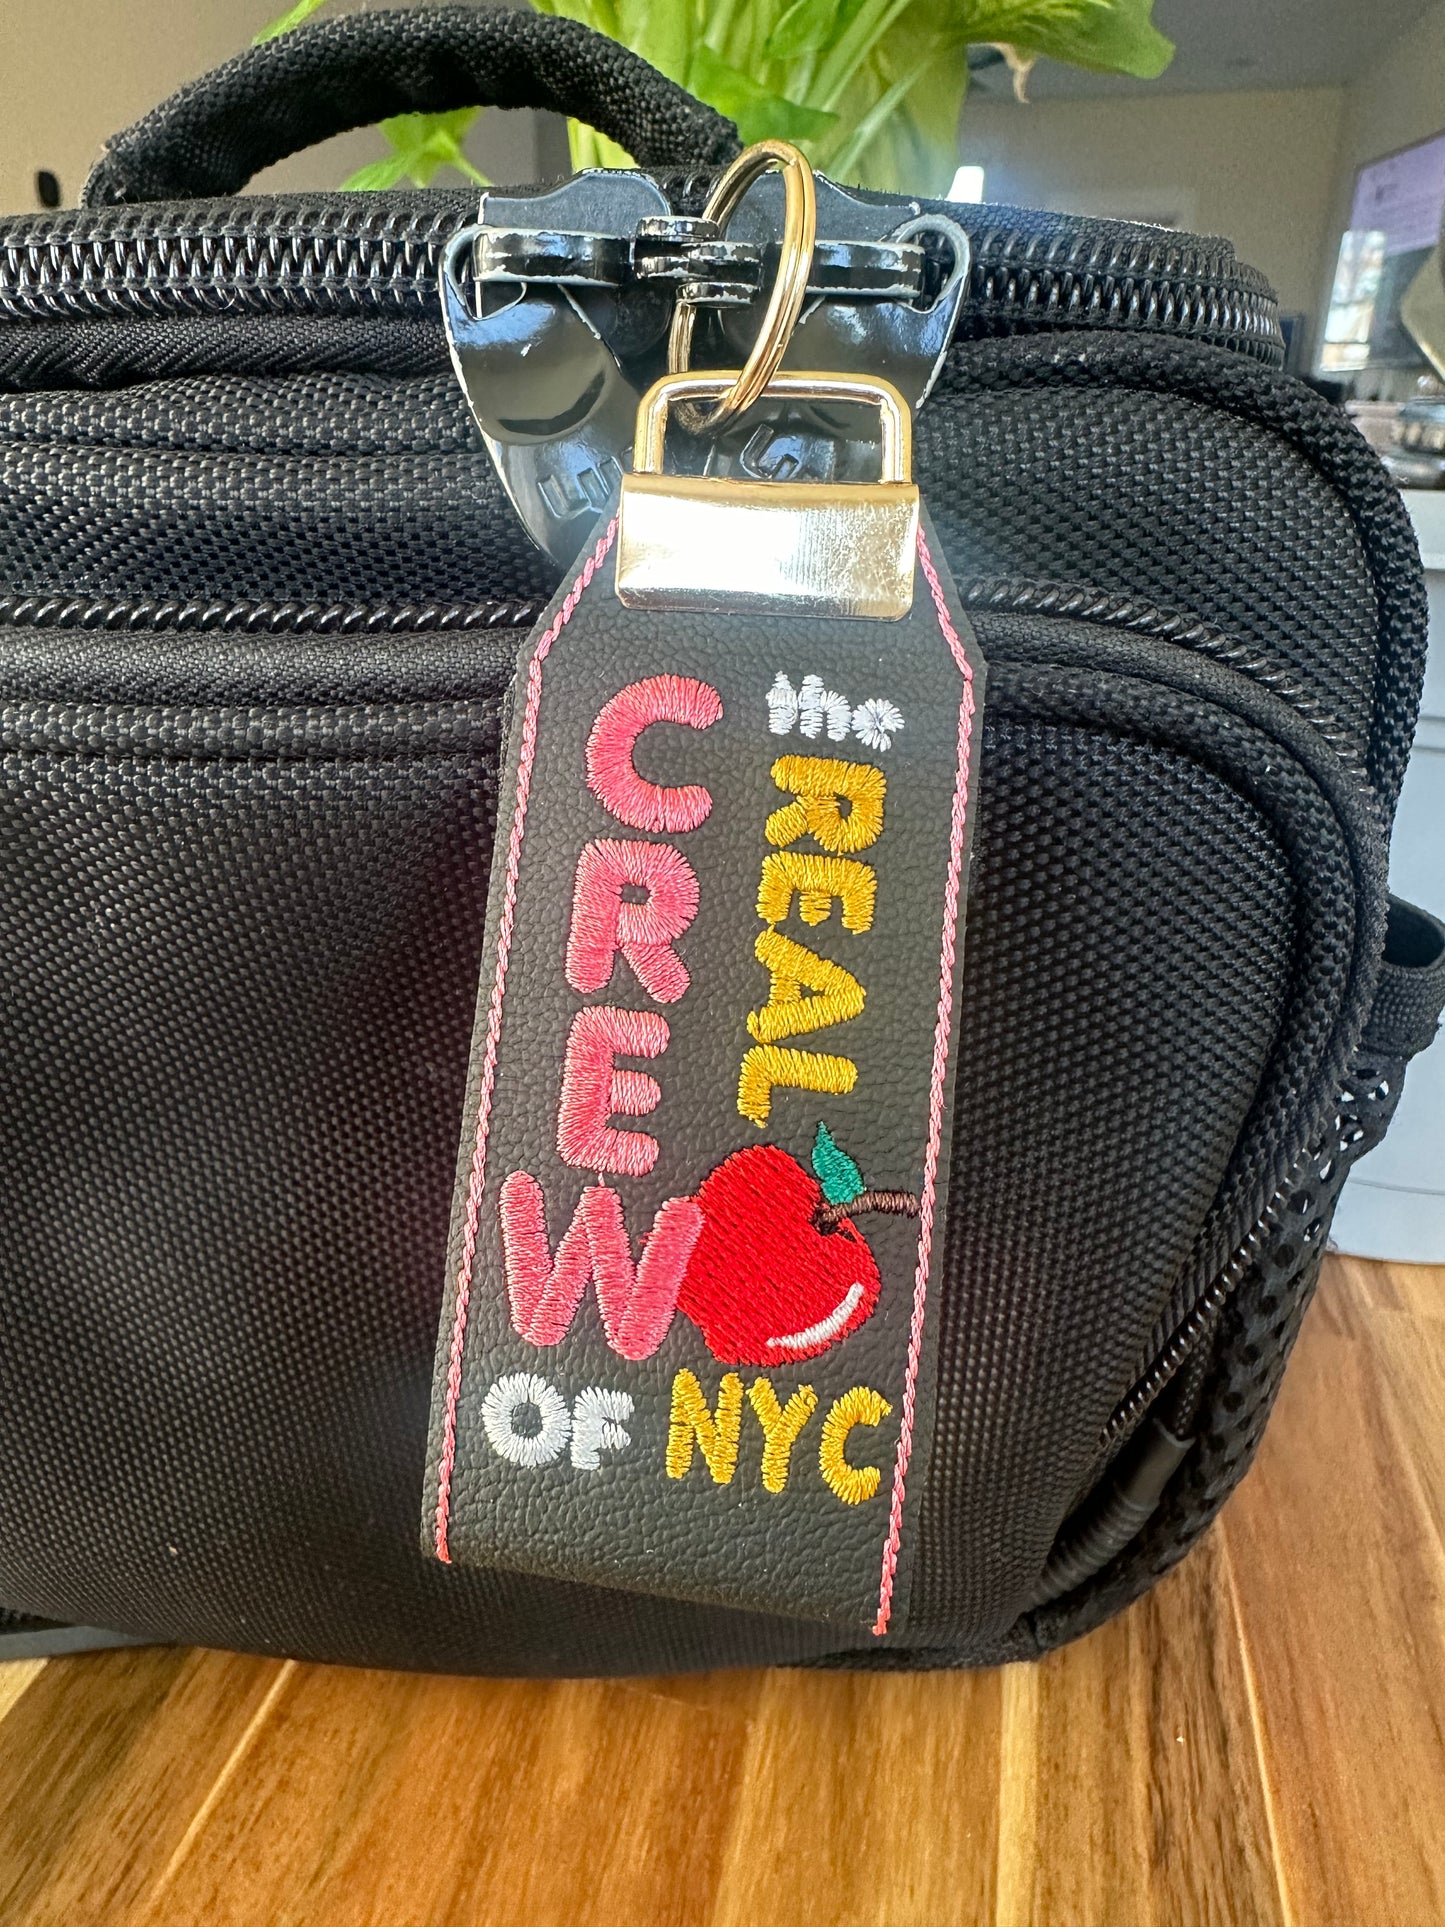 “The REAL Crew” (APPLE) Themed Keychain Fob